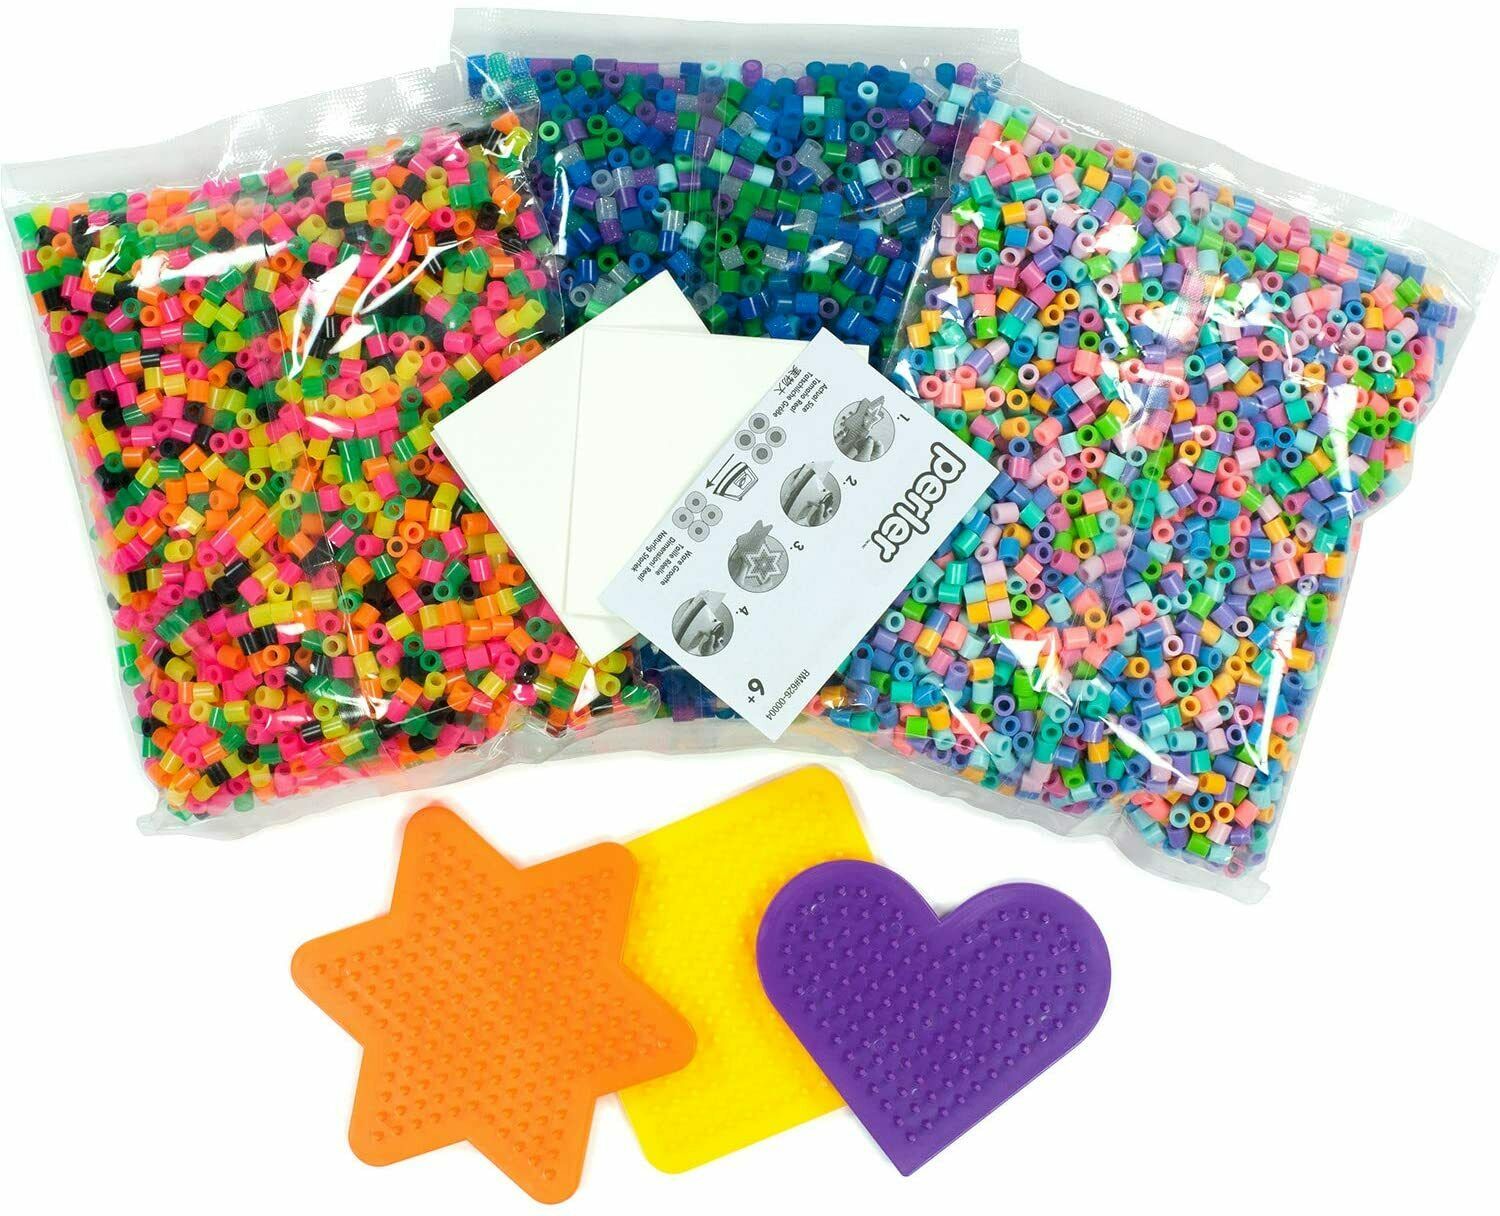 Color Splash Fuse Bead Bucket - 26,000 Beads in Assorted Colors